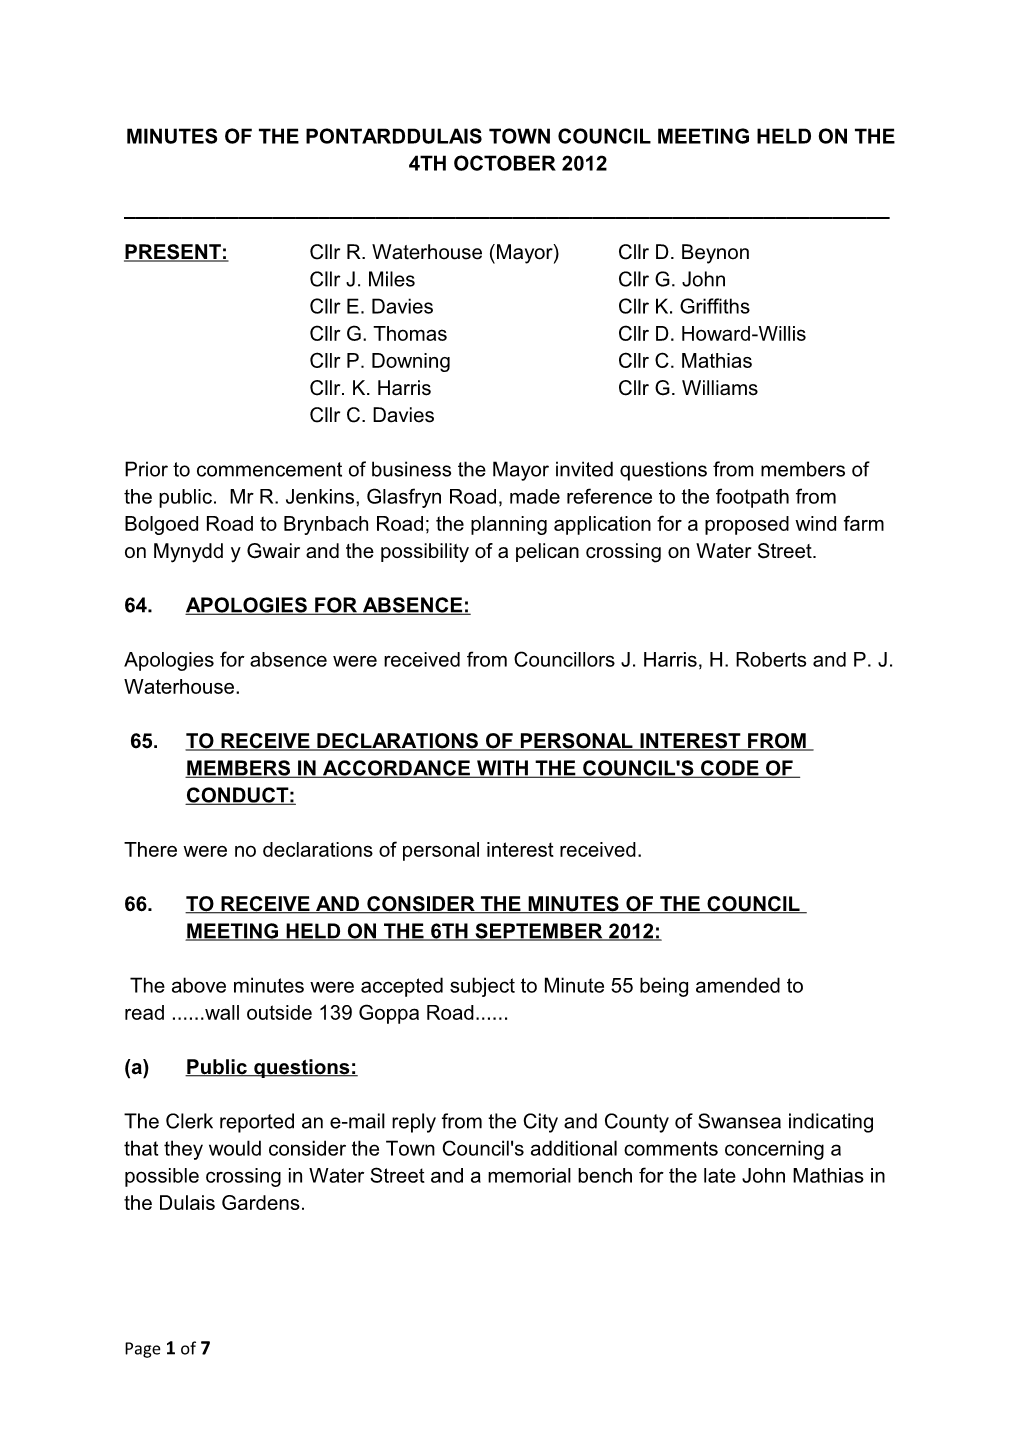 Minutes of the Pontarddulais Town Council Meeting Held on the 4Th October 2012